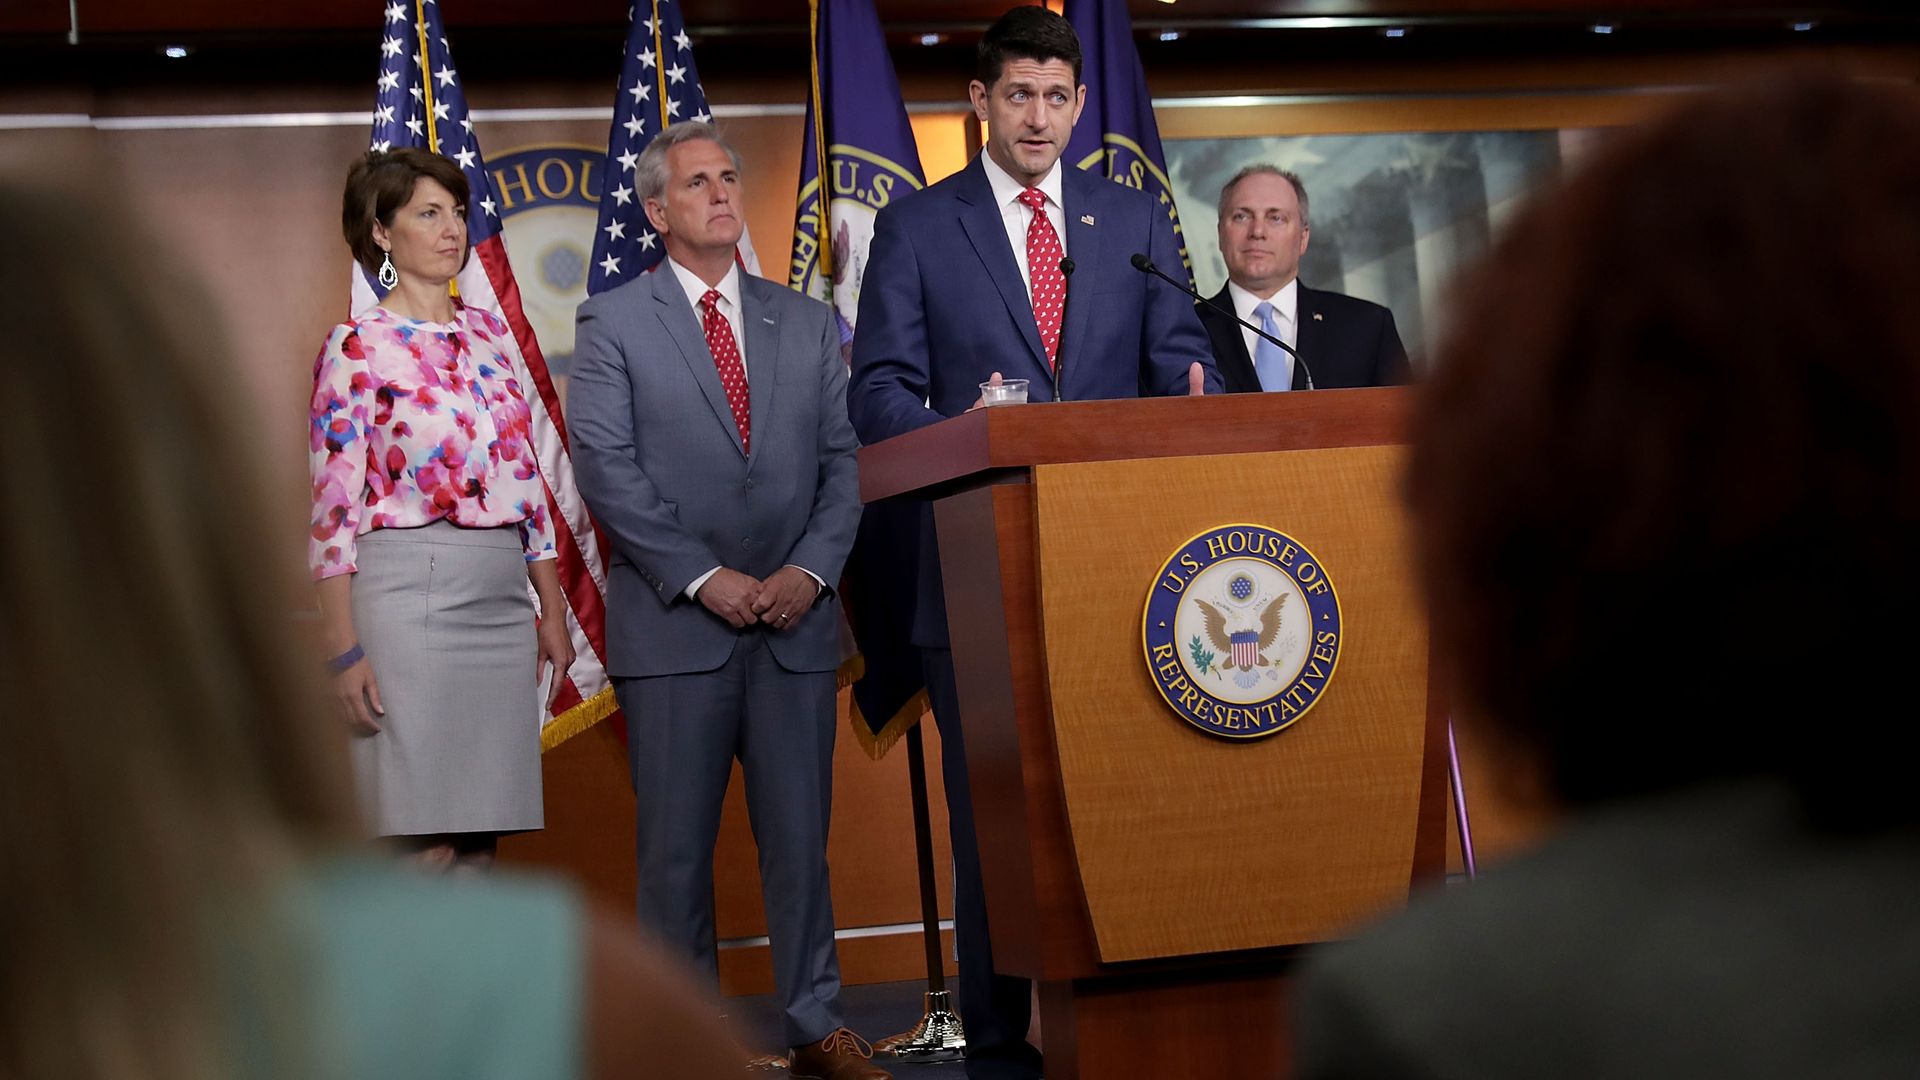 Paul Ryan answering questions at a podium with other GOP House leaders